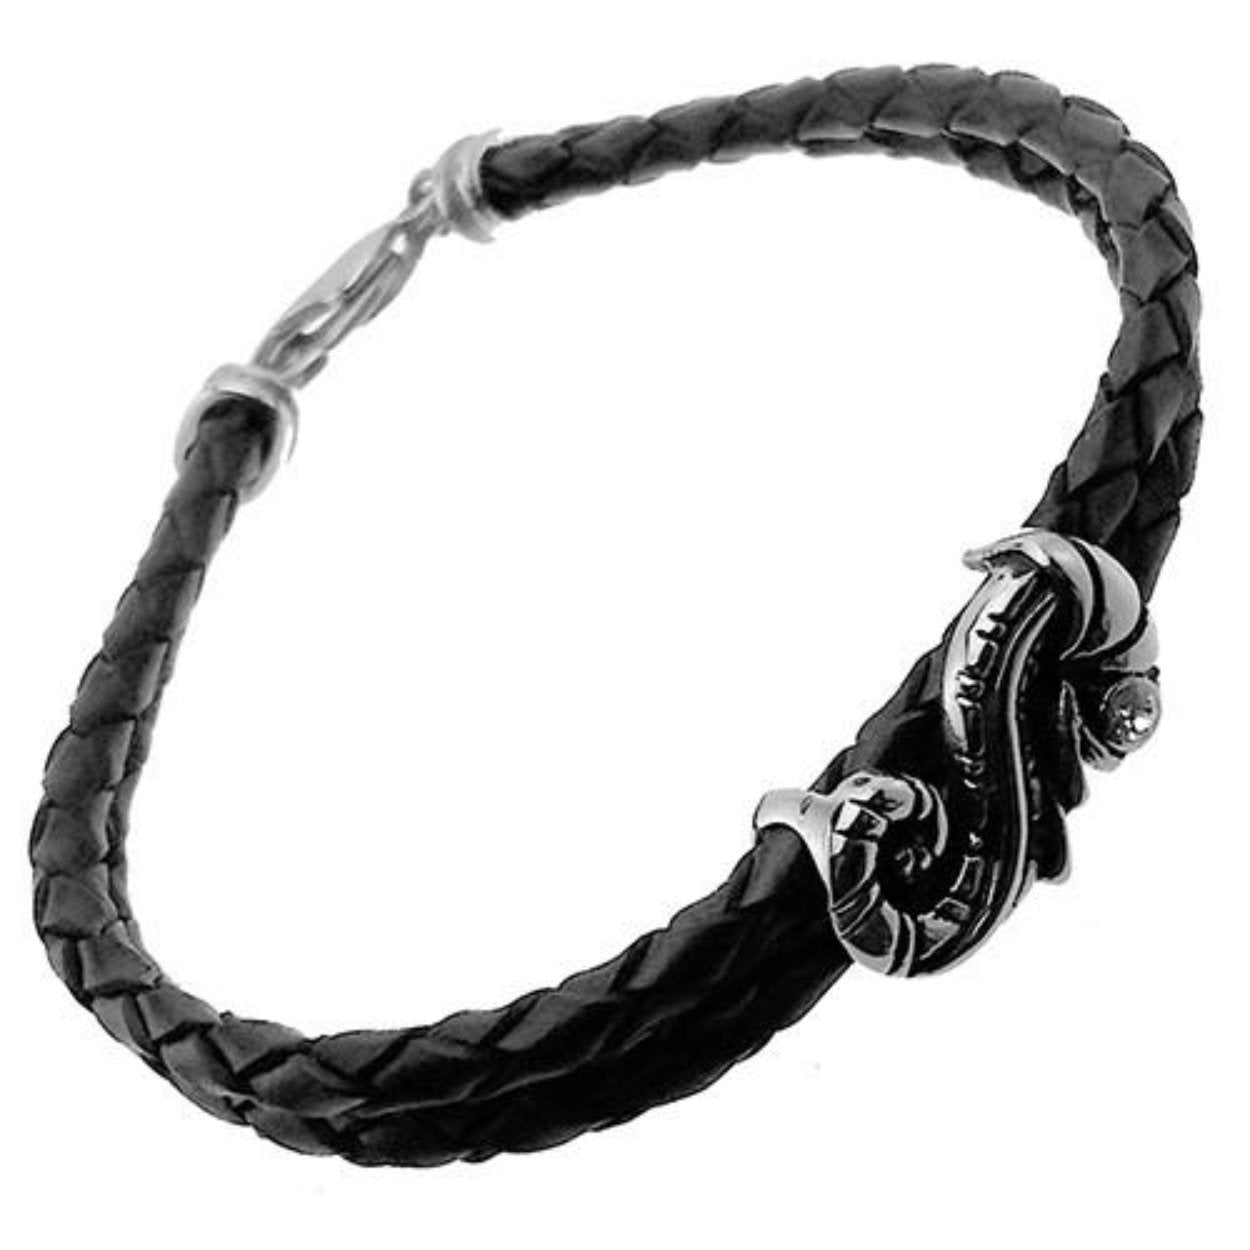 Braided Genuine Leather Bracelet with Seahorse in Stainless Steel and Jeweled Eye